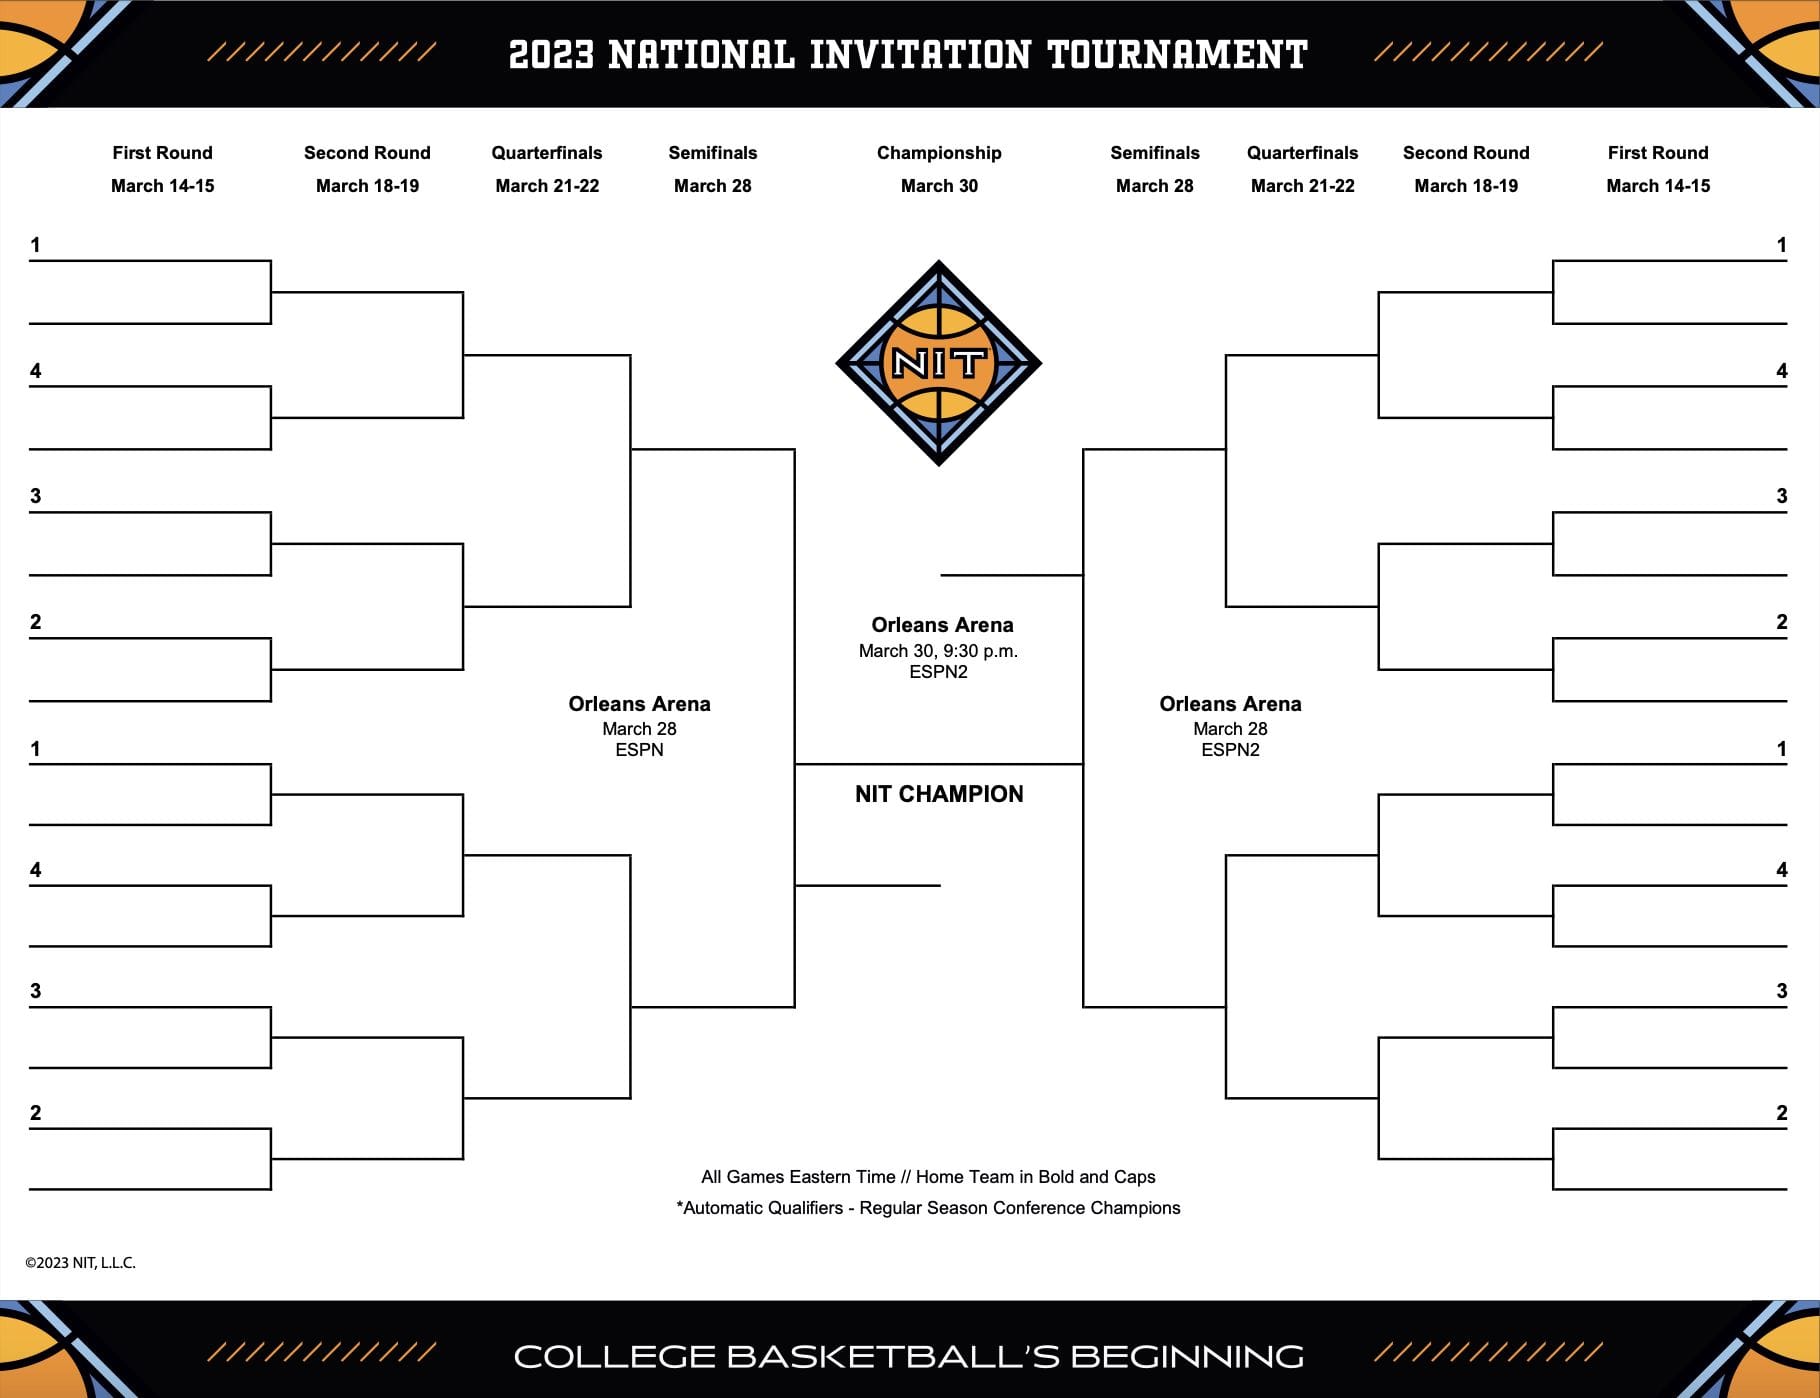 NIT Selection Show 2023 Bracket, time, date, channel and how to watch